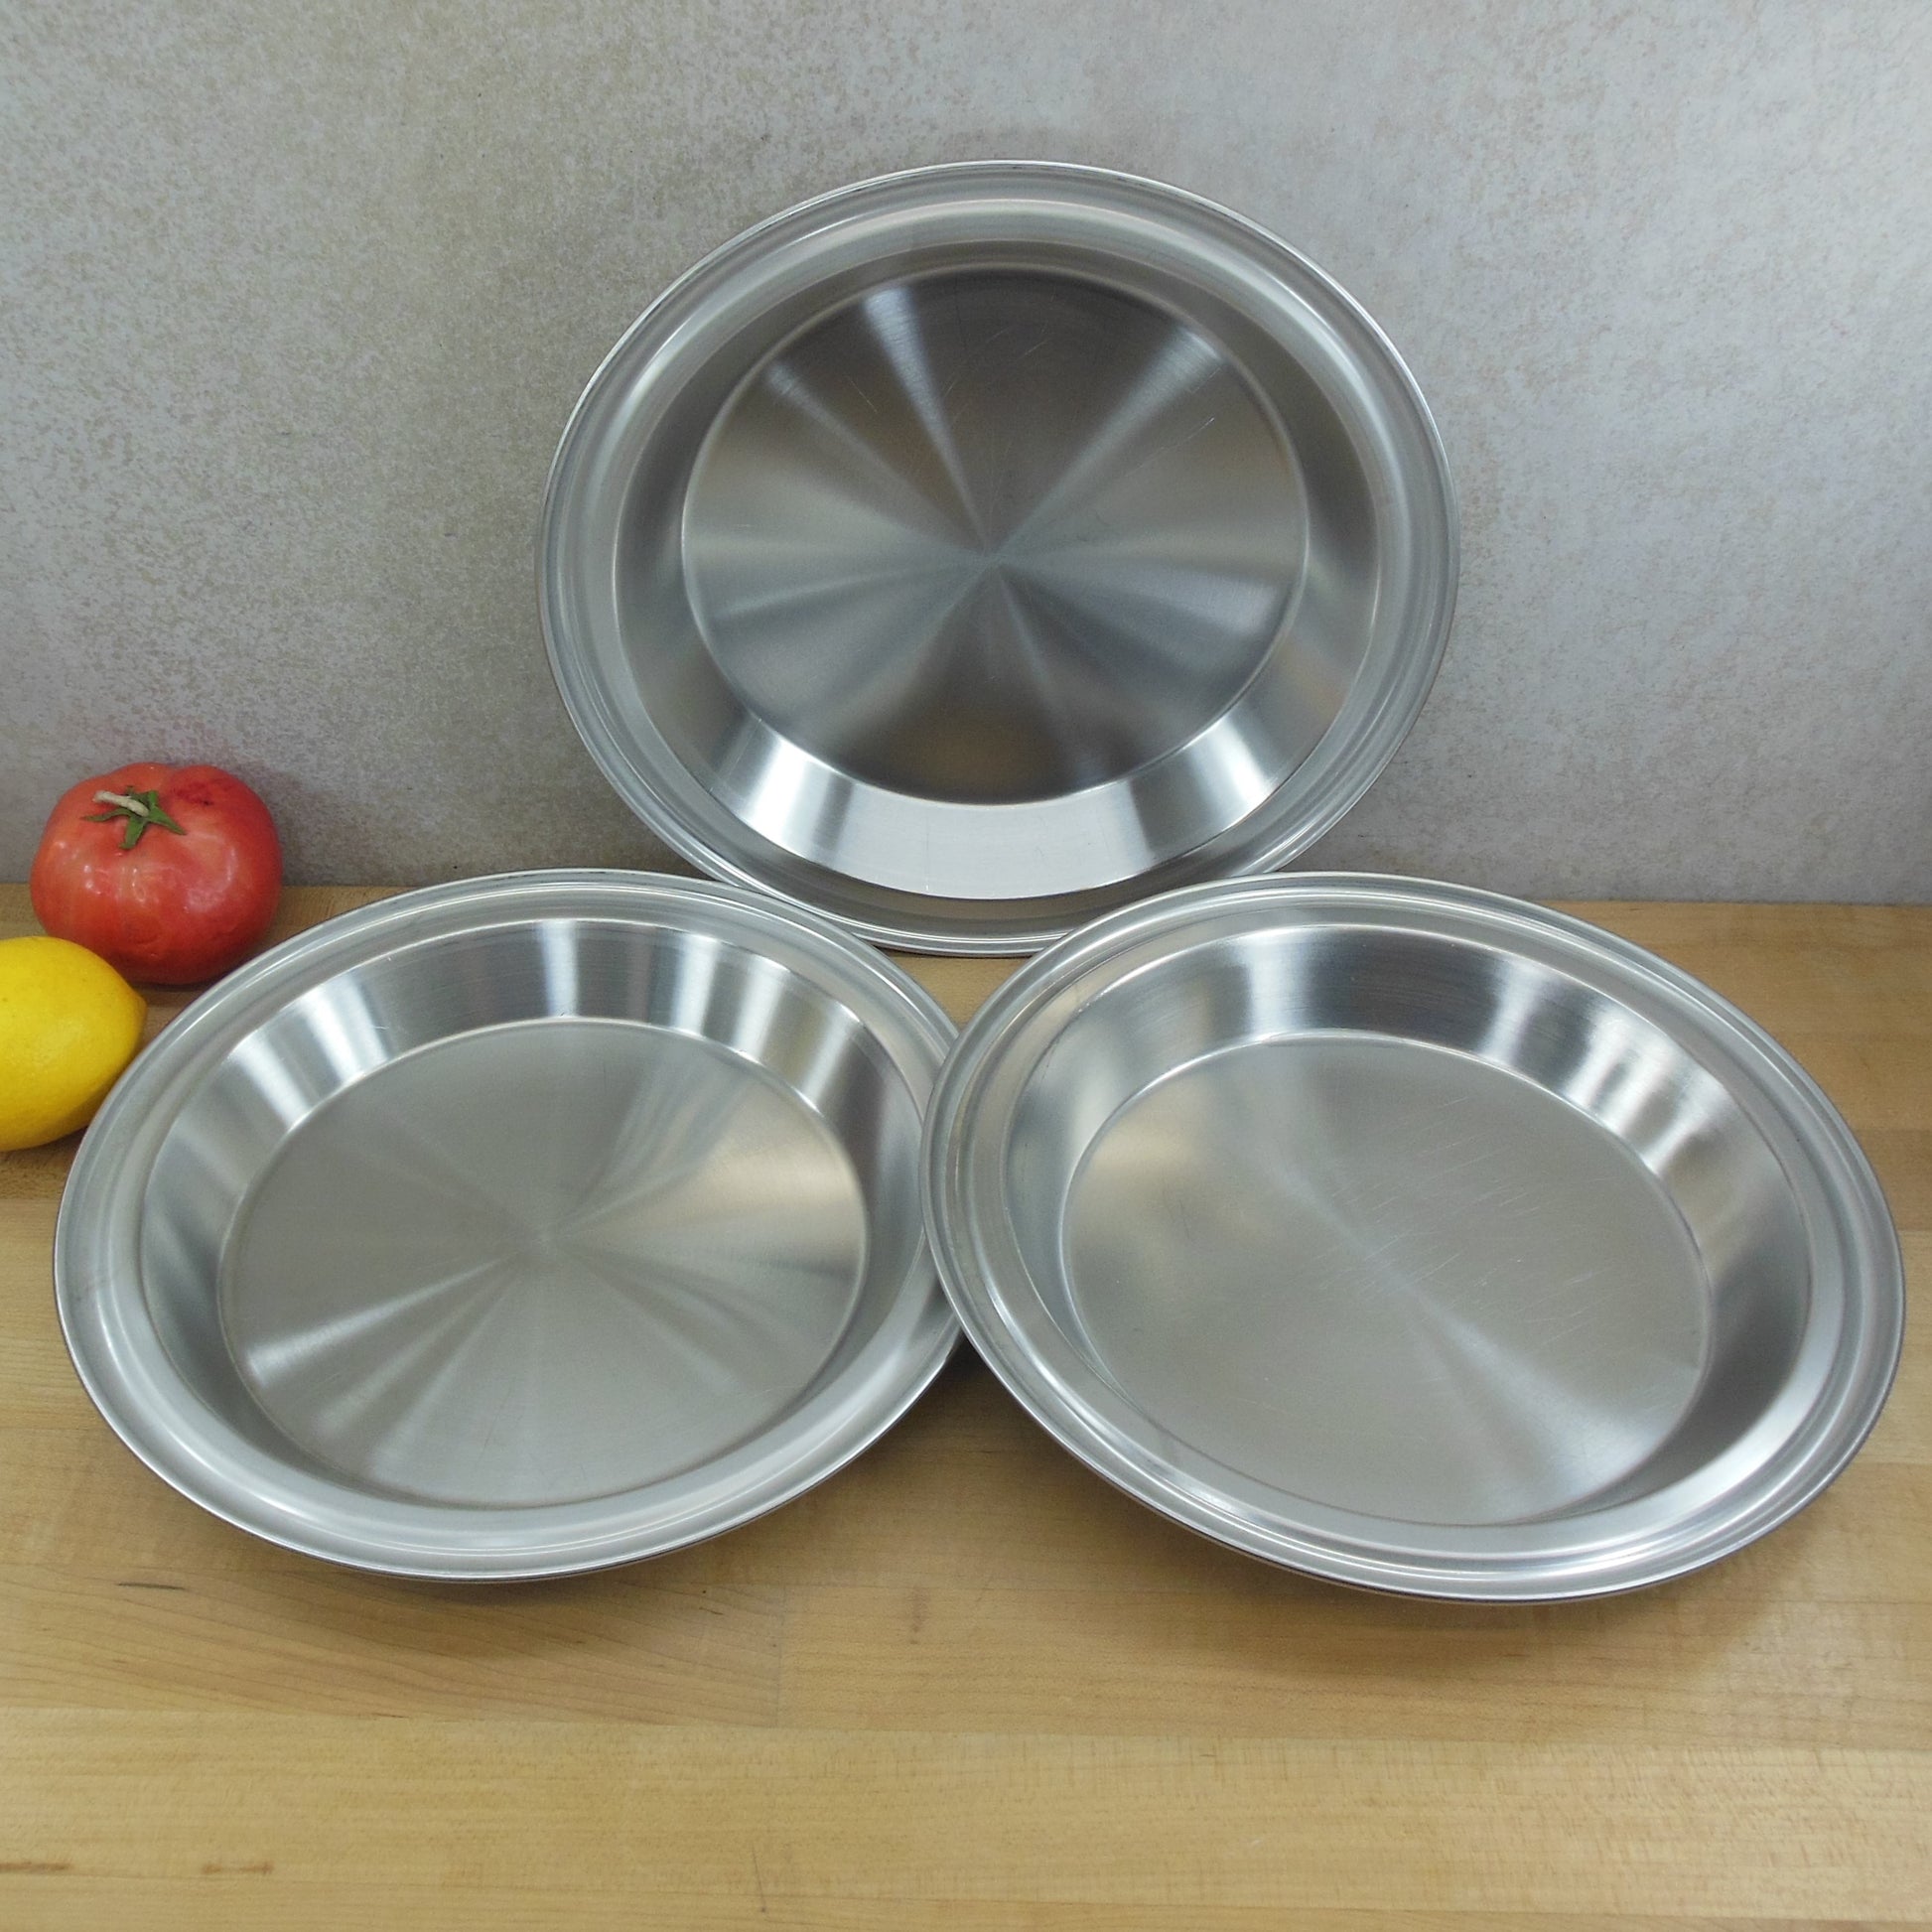 Unbranded Trio No Drip Edge Stainless Steel Pie Pan Plates 9" x 1-1/2" or 11"